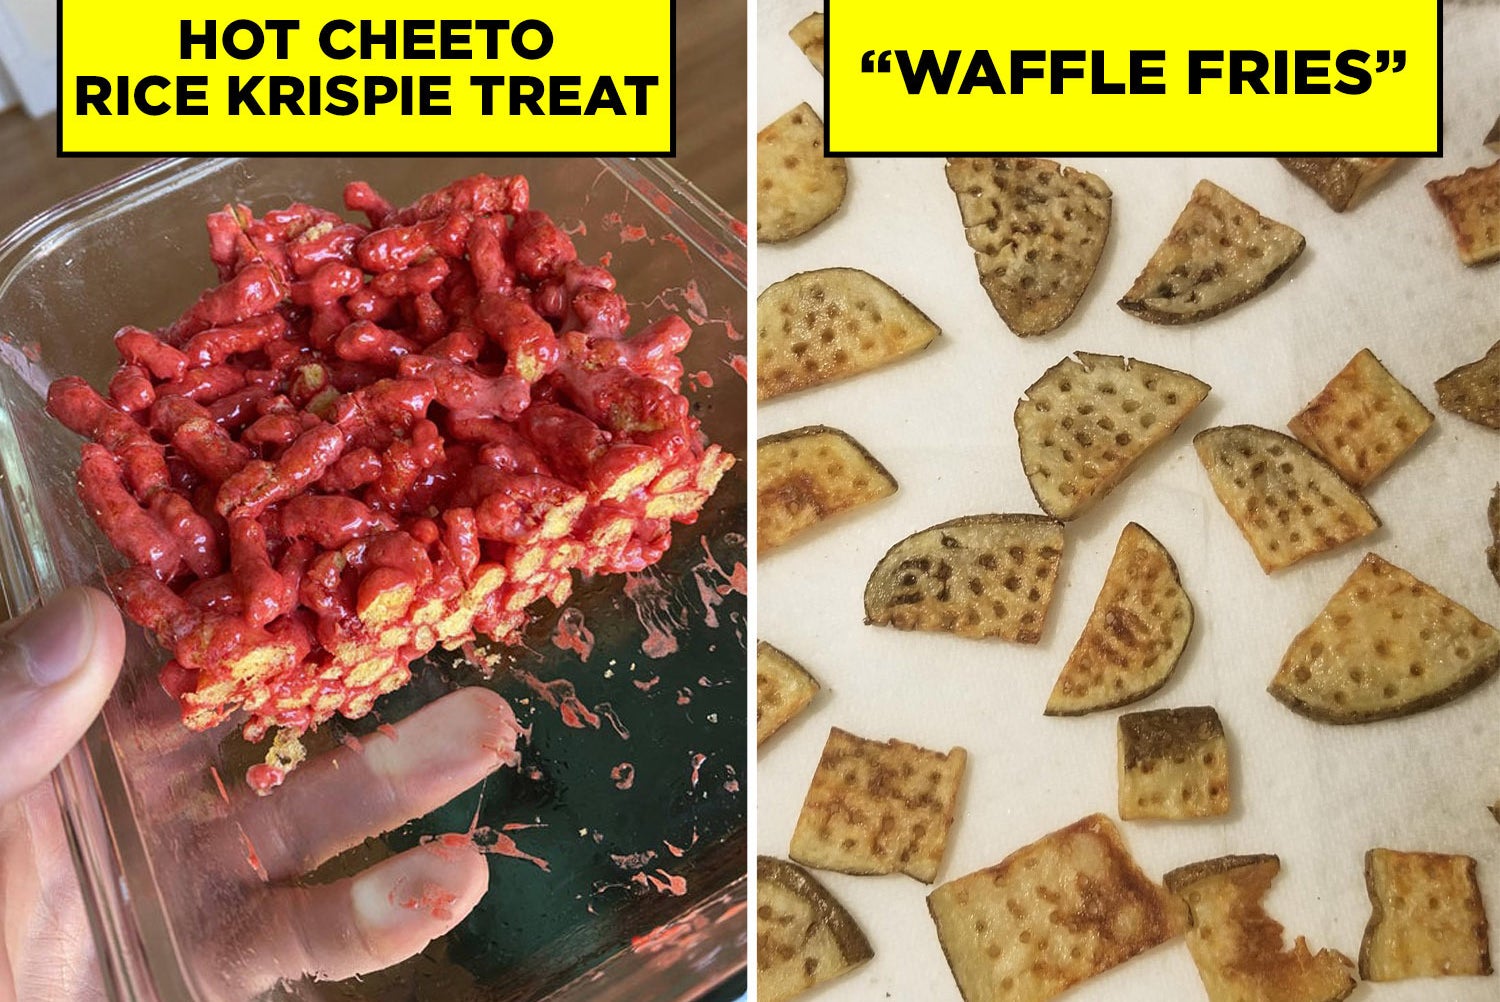 23 Quarantine Meals Crimes That Can Most animated Be Described As “Ingenious, But Deeply Upsetting”